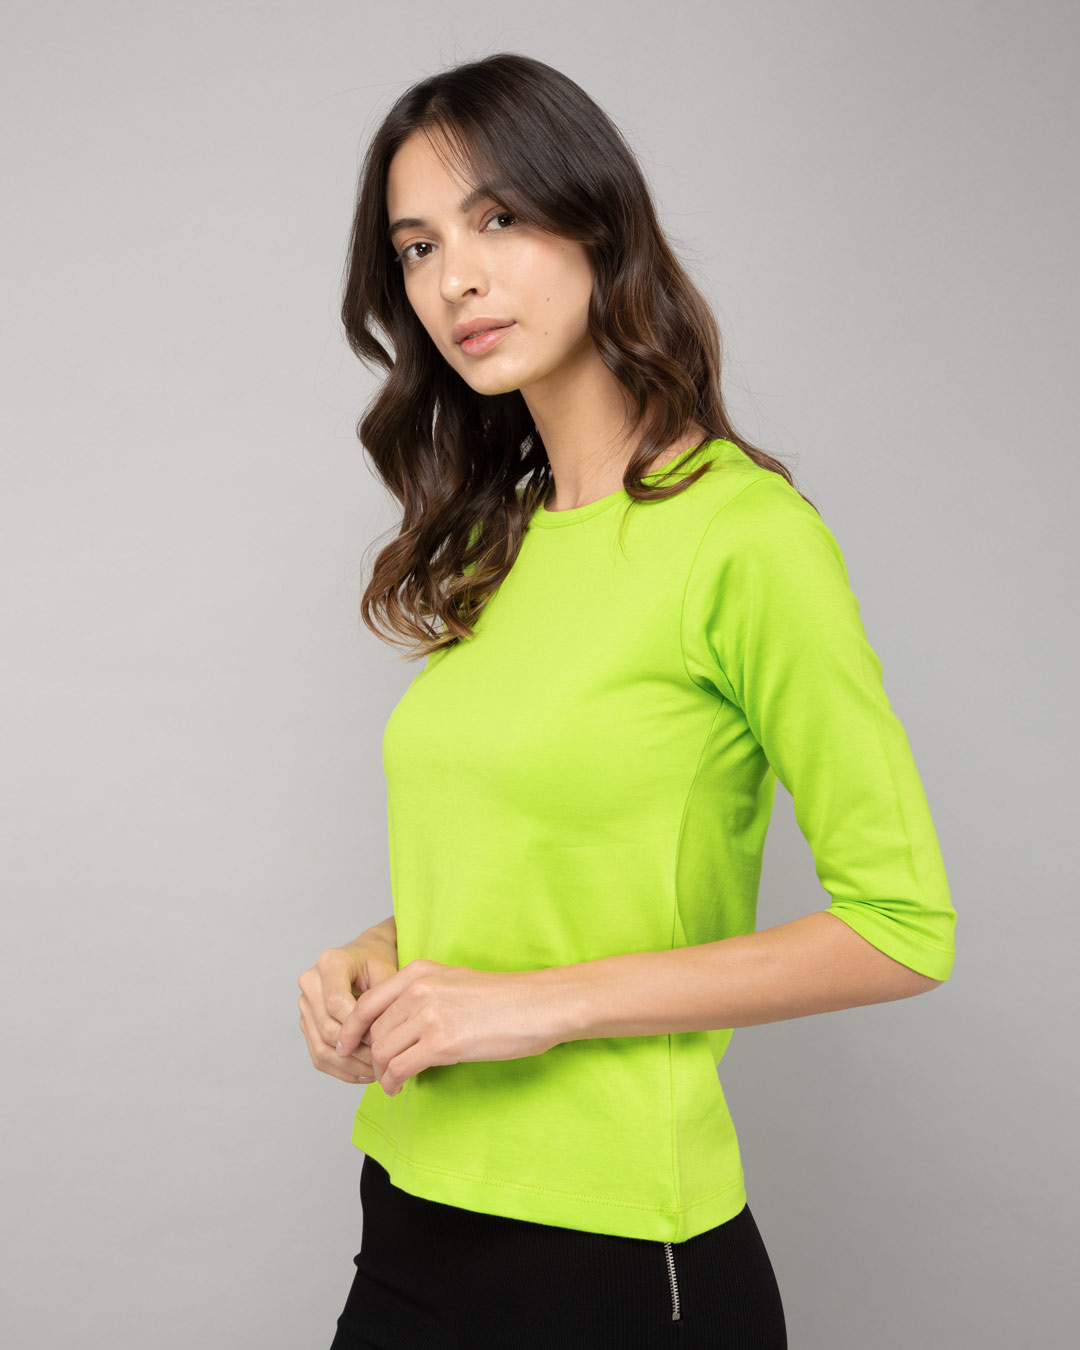 neon t shirts for girls